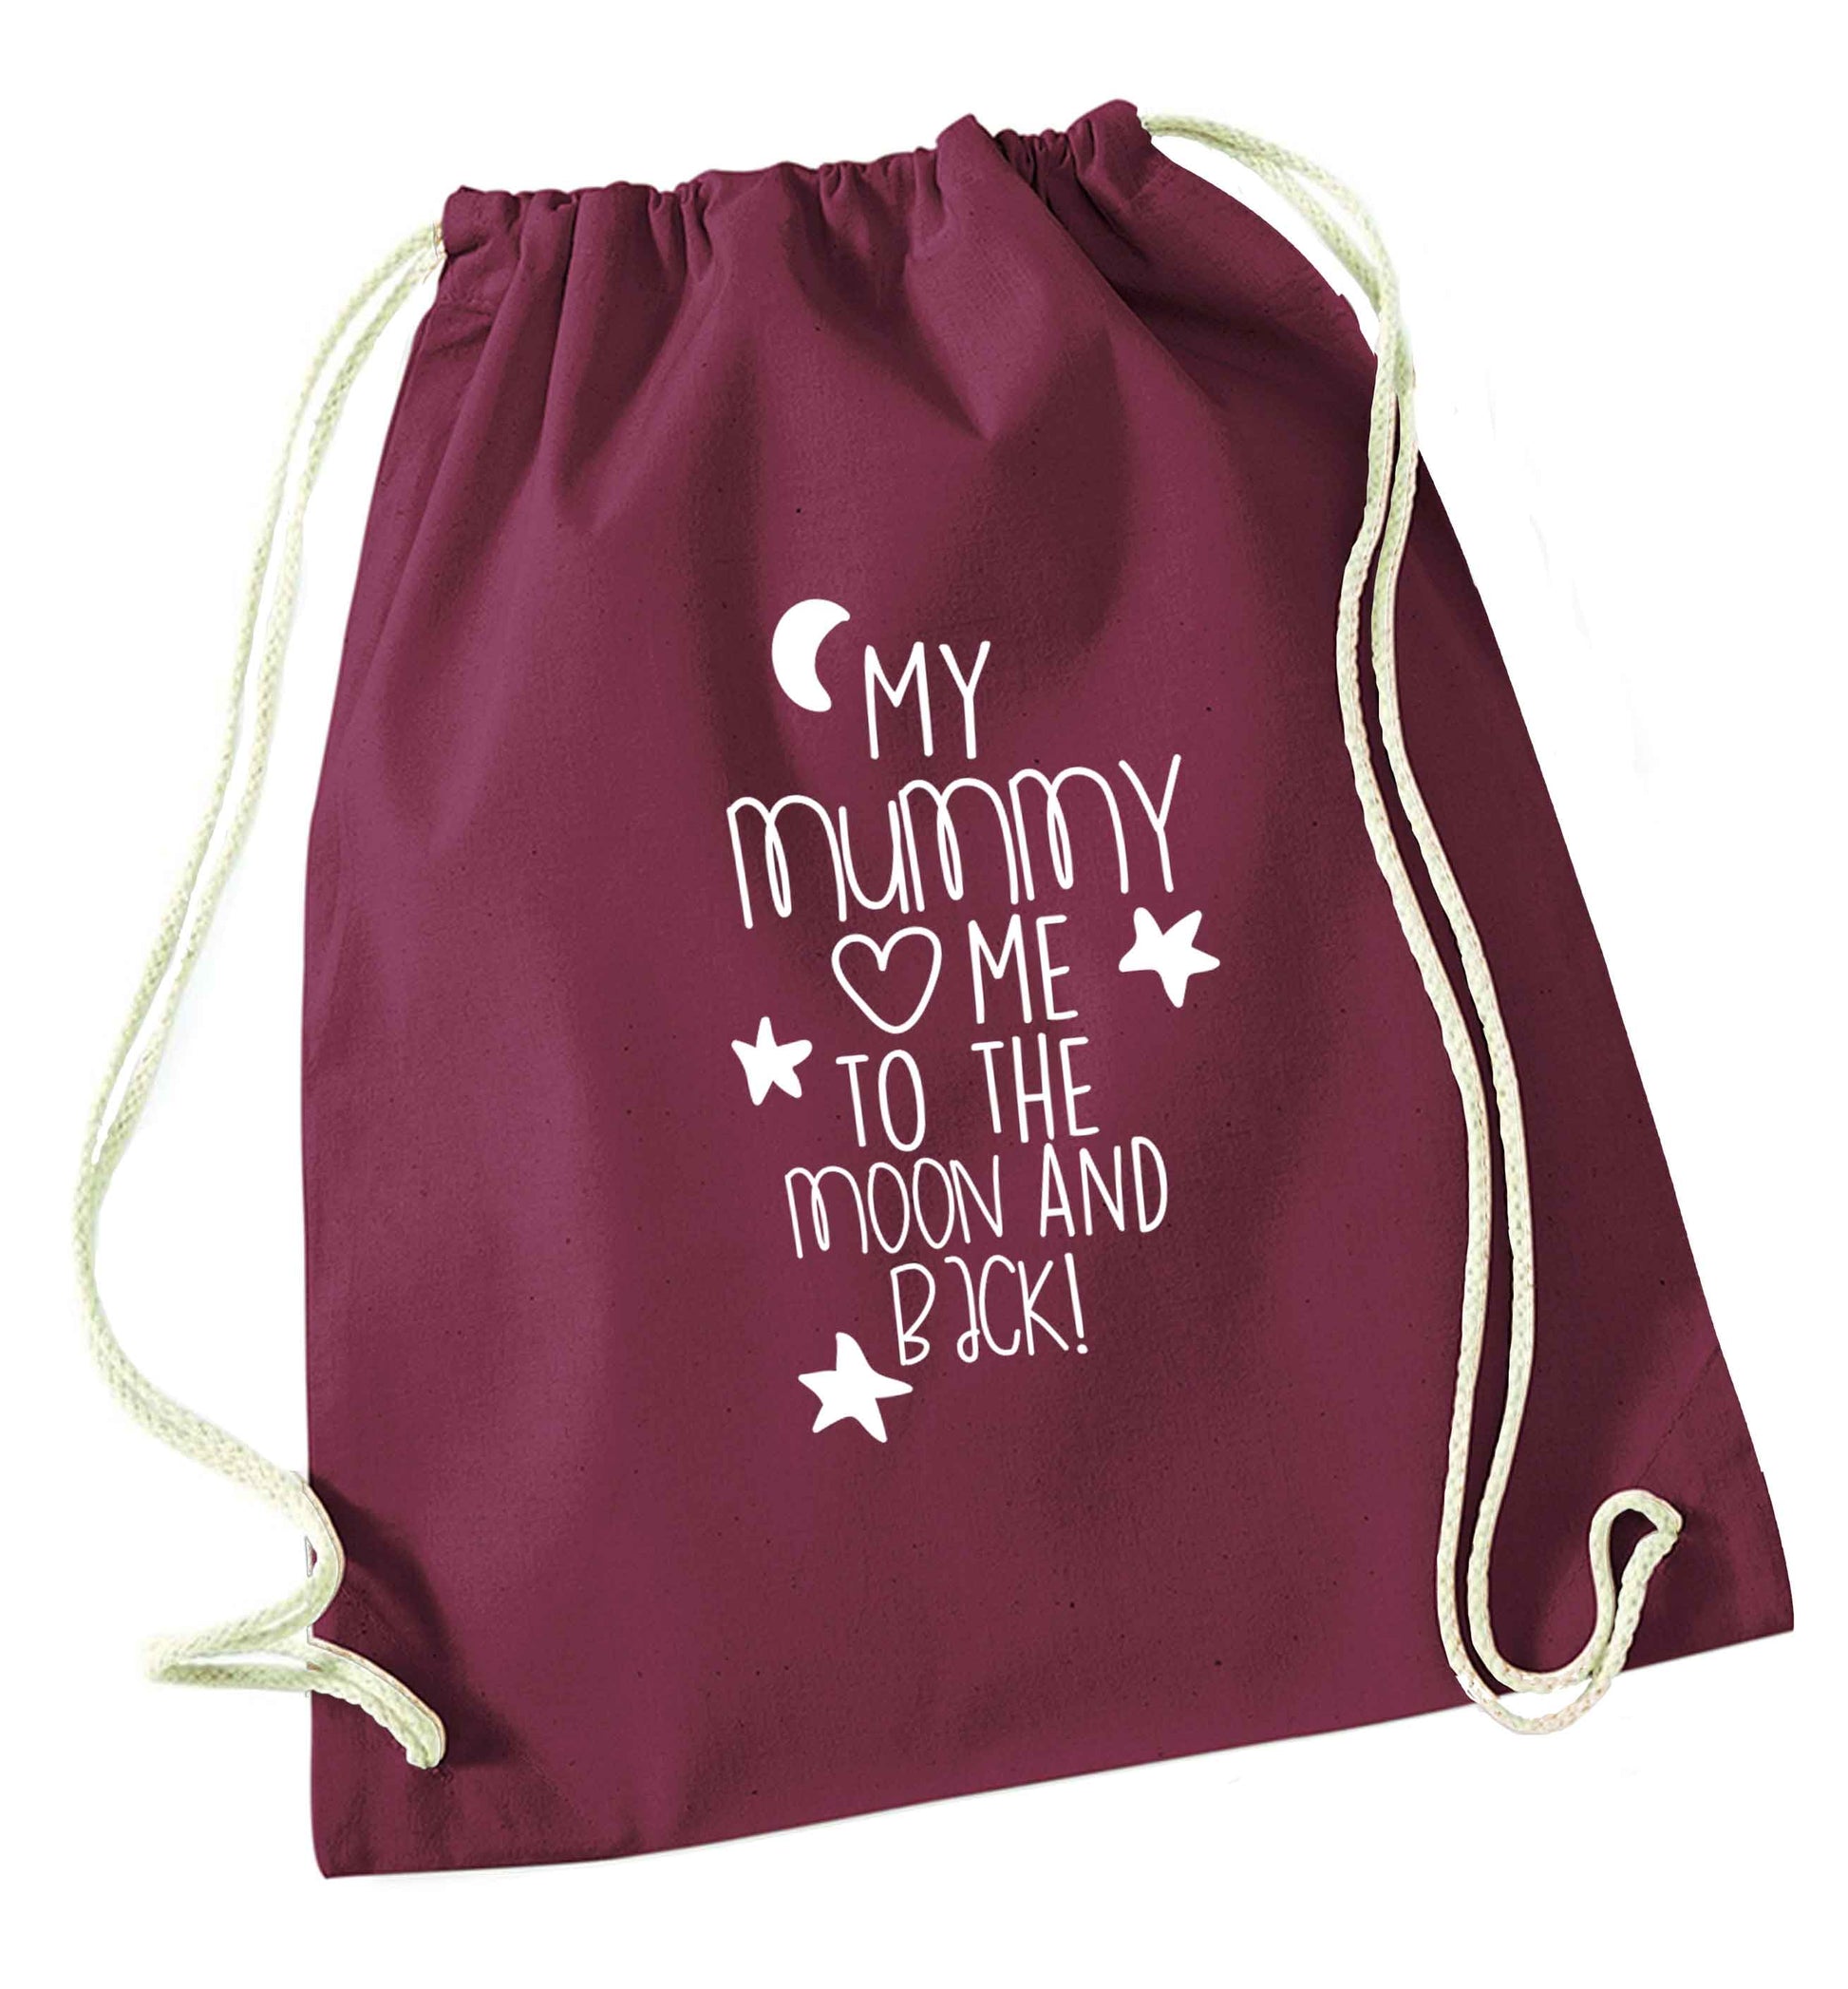 My mum loves me to the moon and back maroon drawstring bag